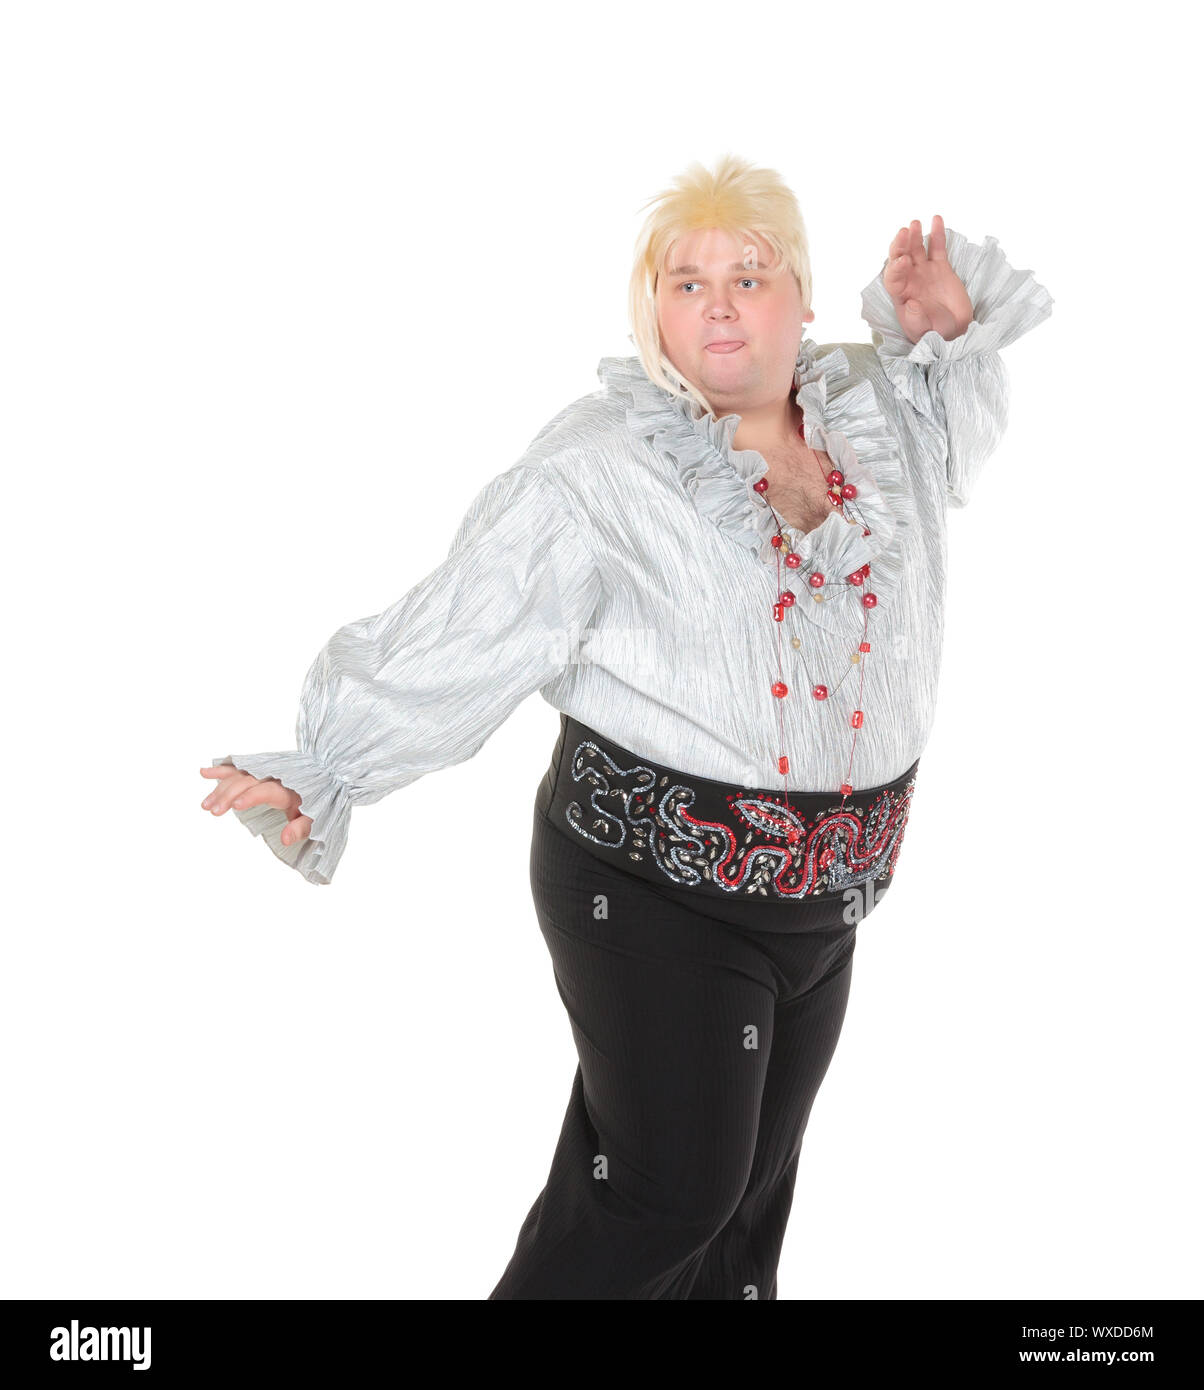 Crazy funny fat man posing wearing a blonde wig and traditional clothes, on white Stock Photo